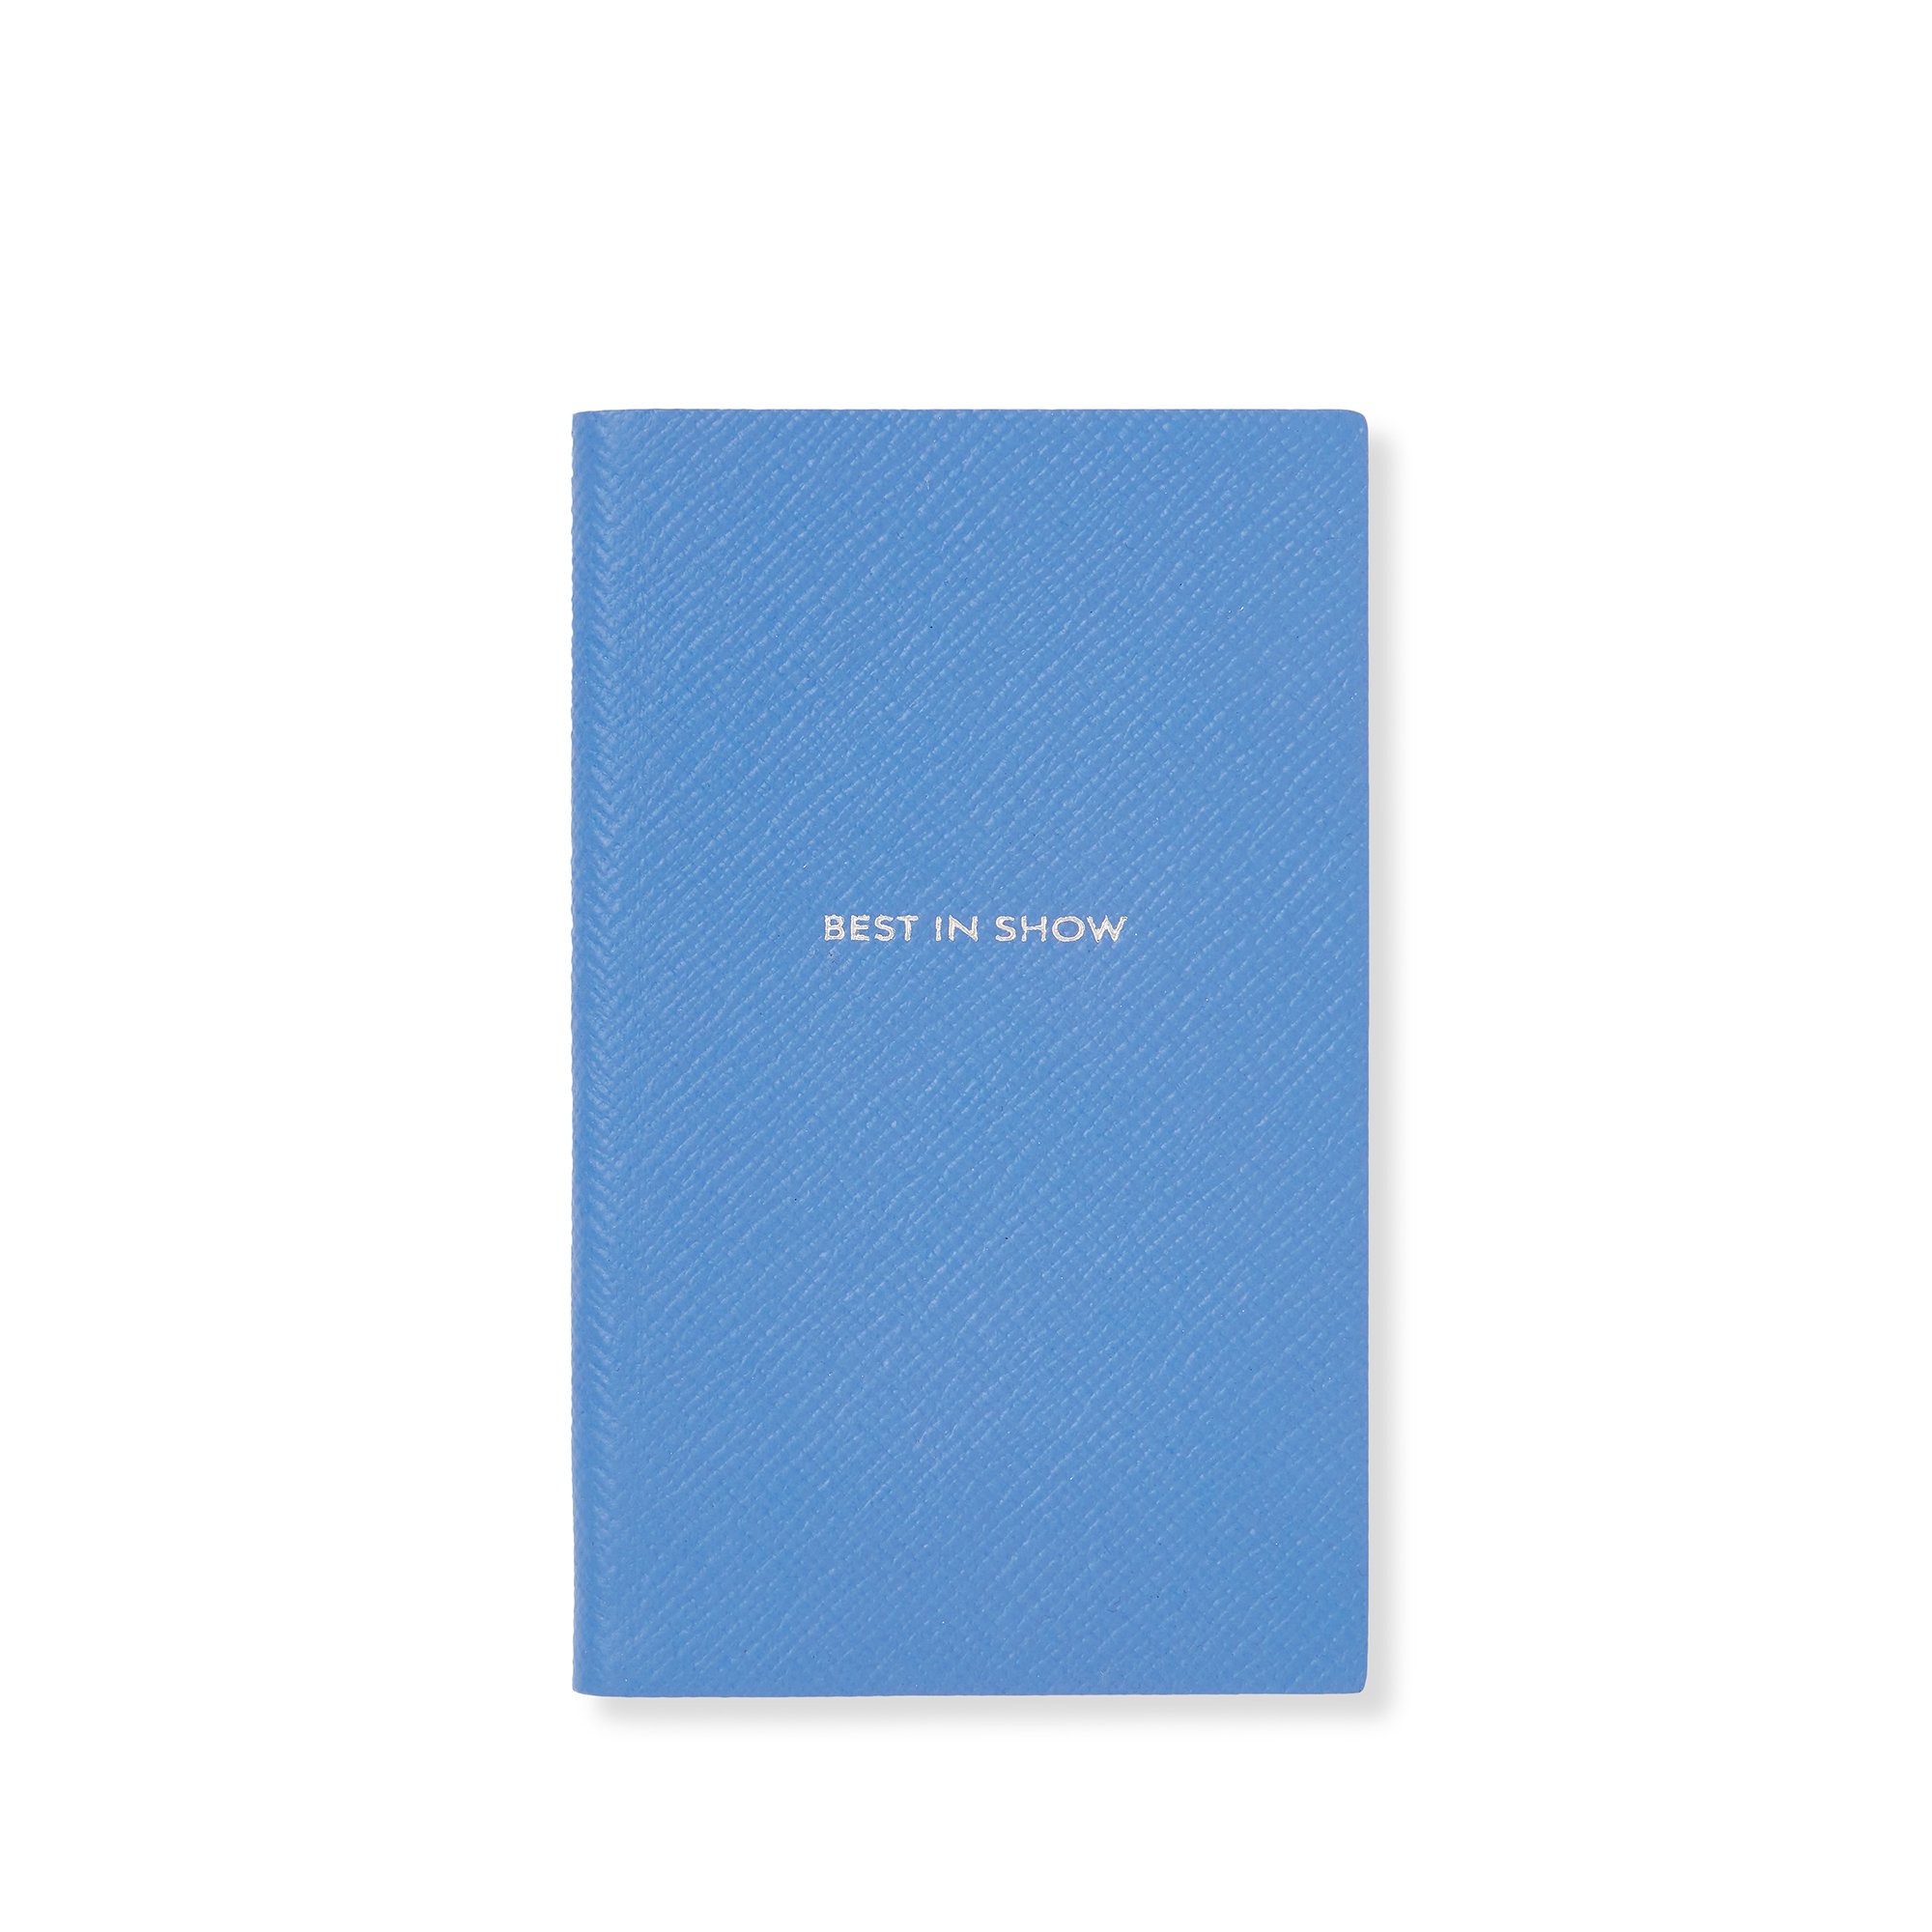 Smythson Best In Show Panama Notebook In Nile Blue